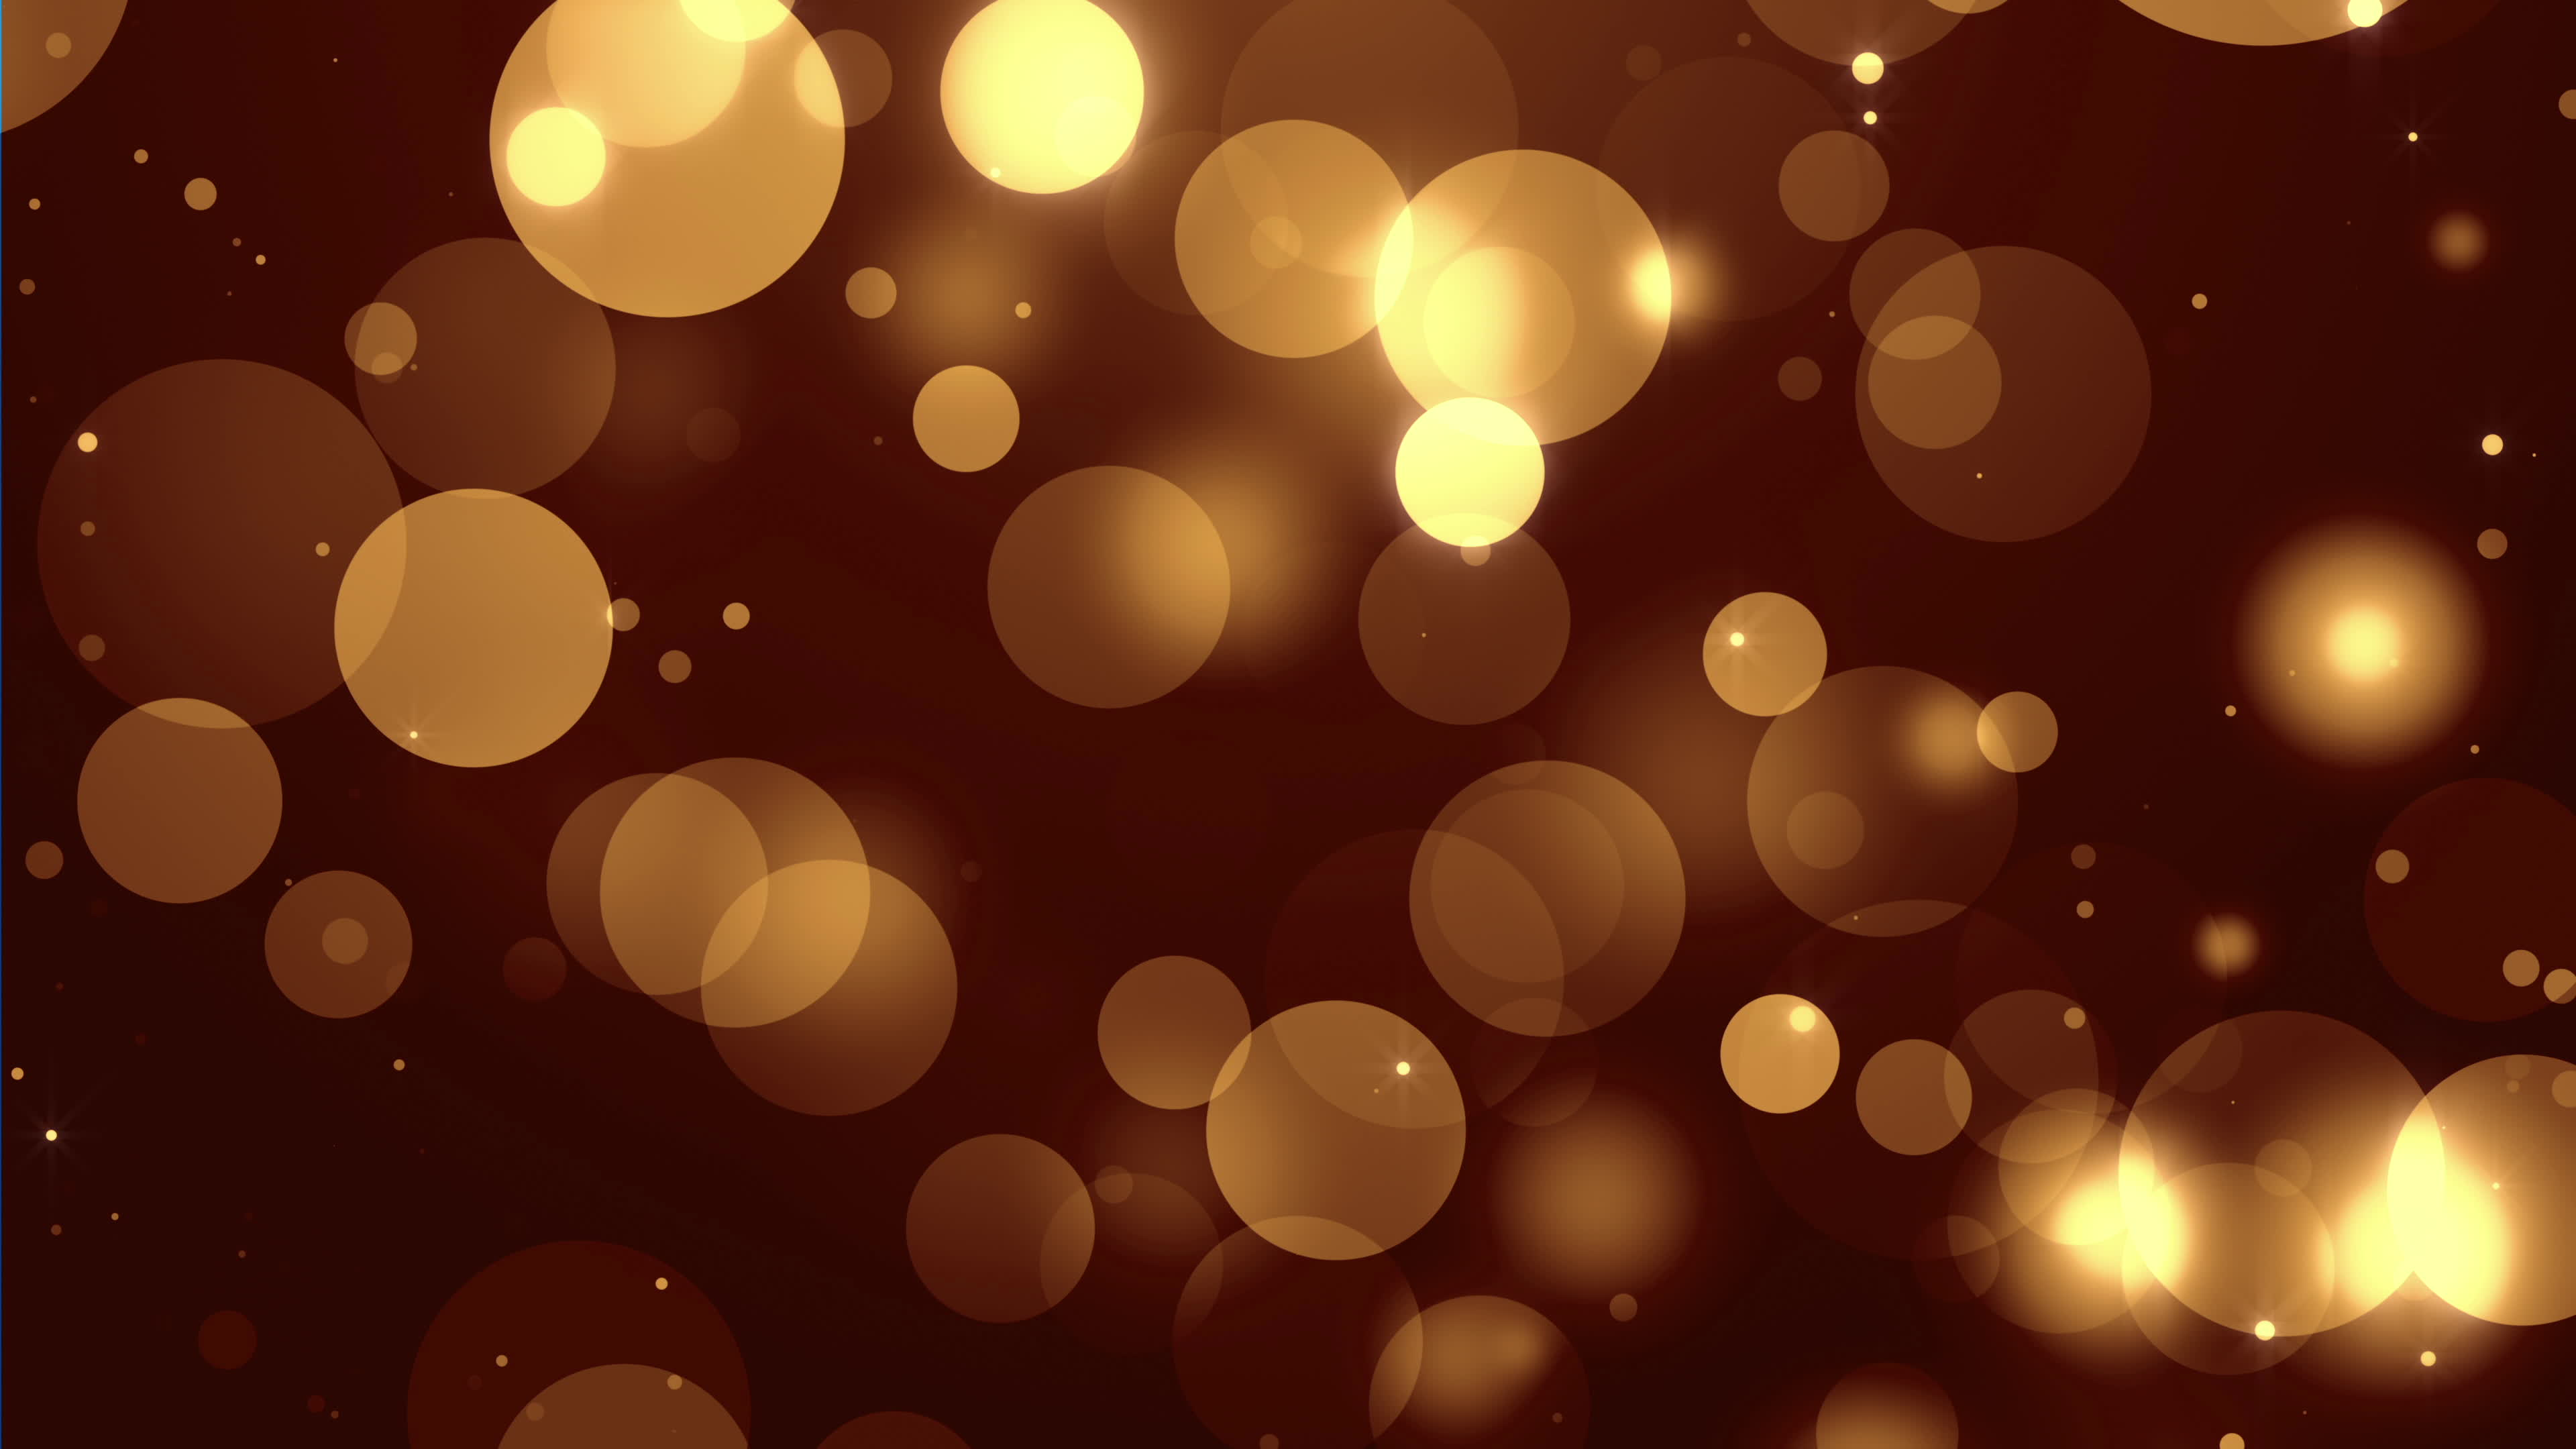 black and gold bokeh video